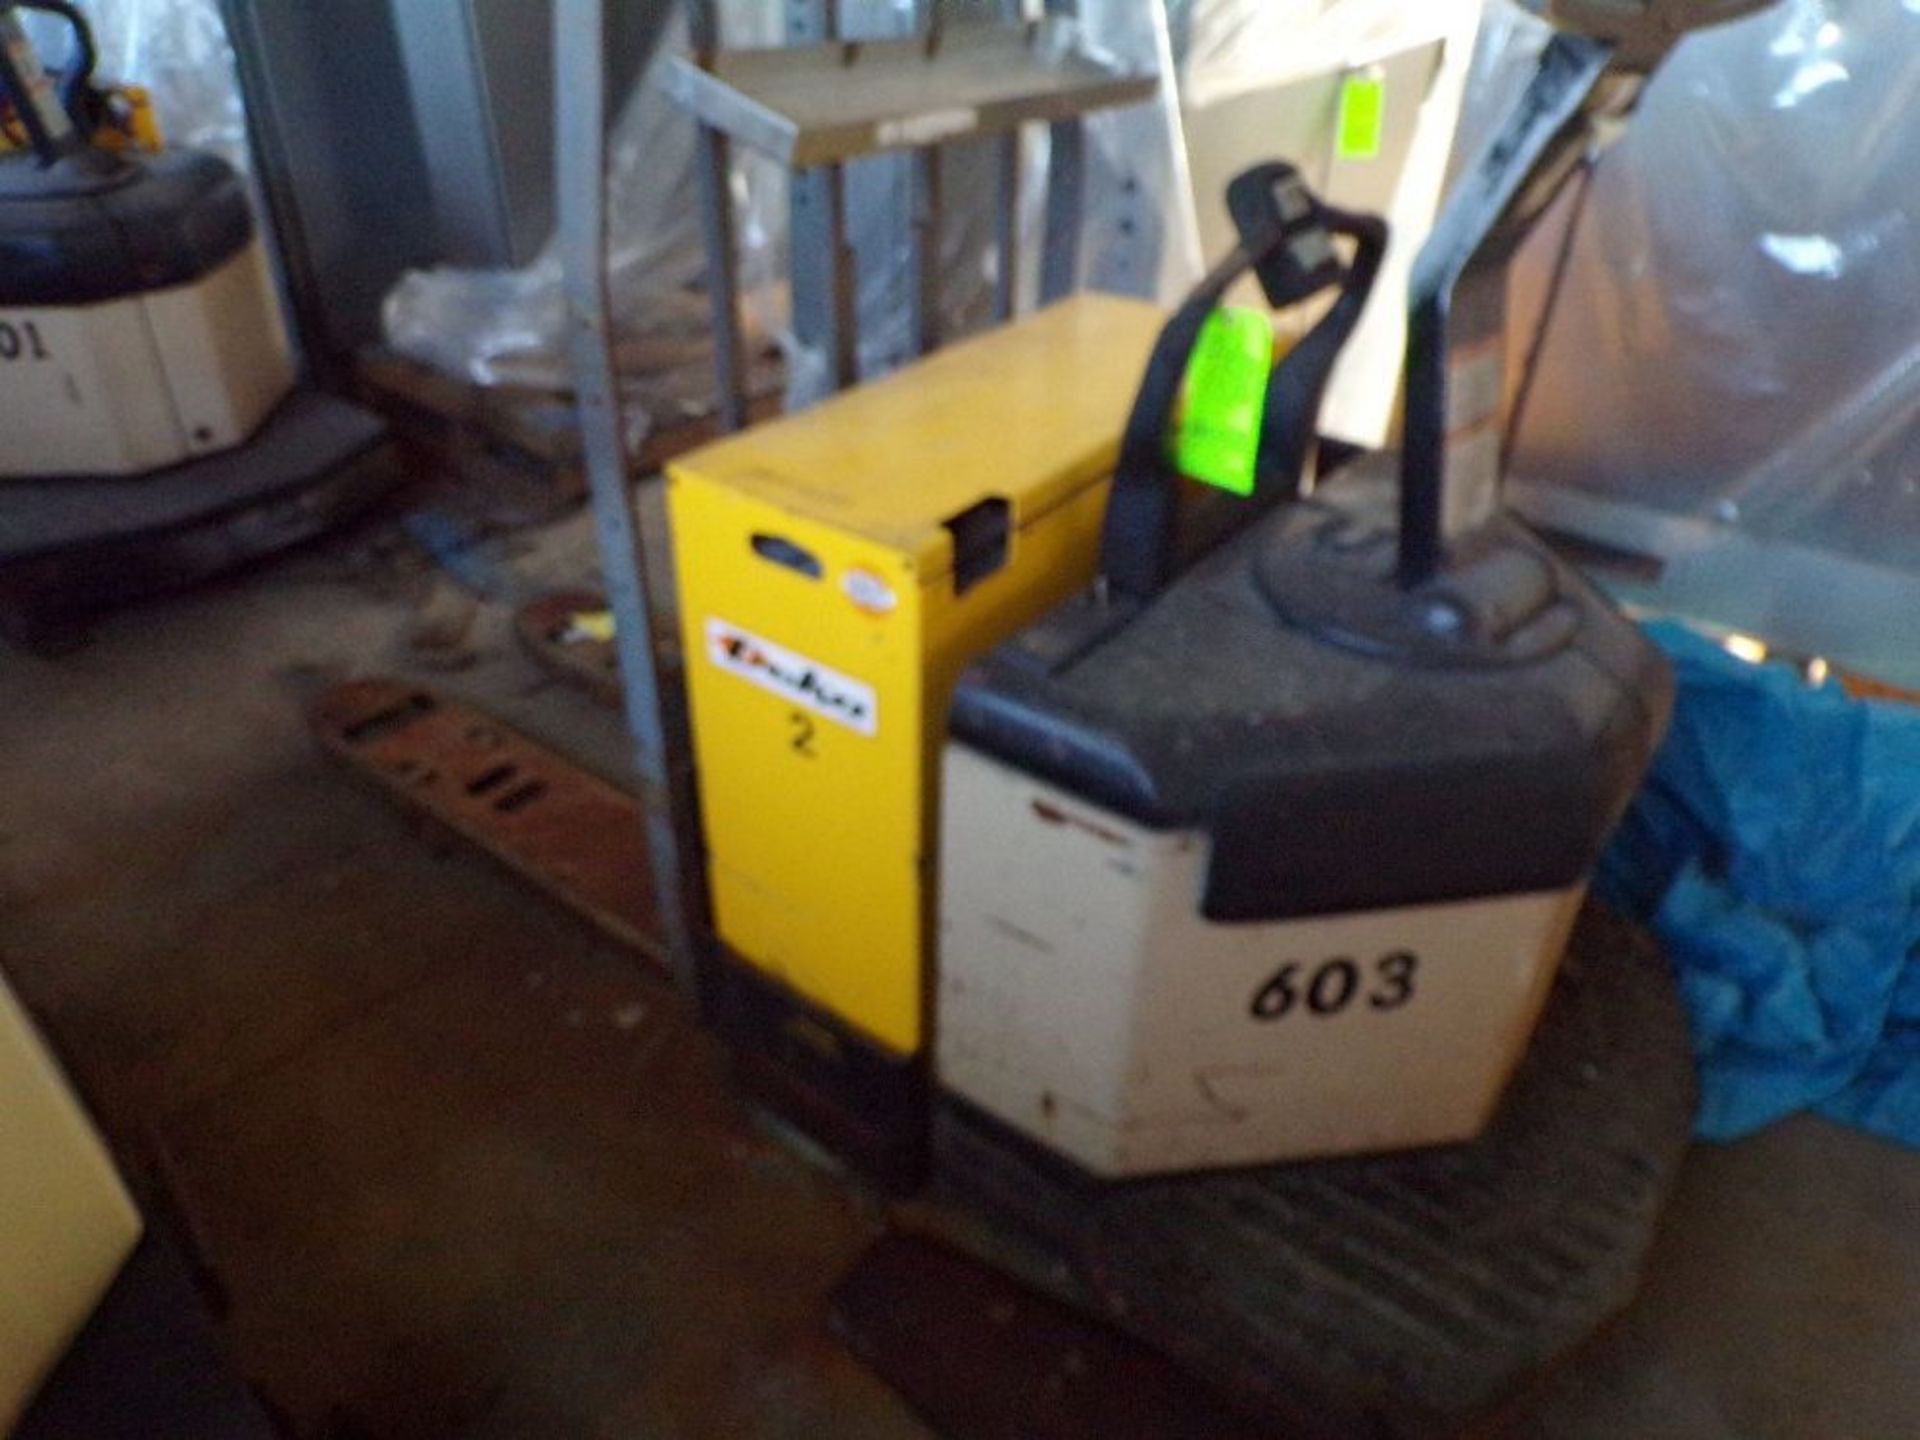 Pallet Jack - 48" Long Forks - Has a protective cage - Not in running condition